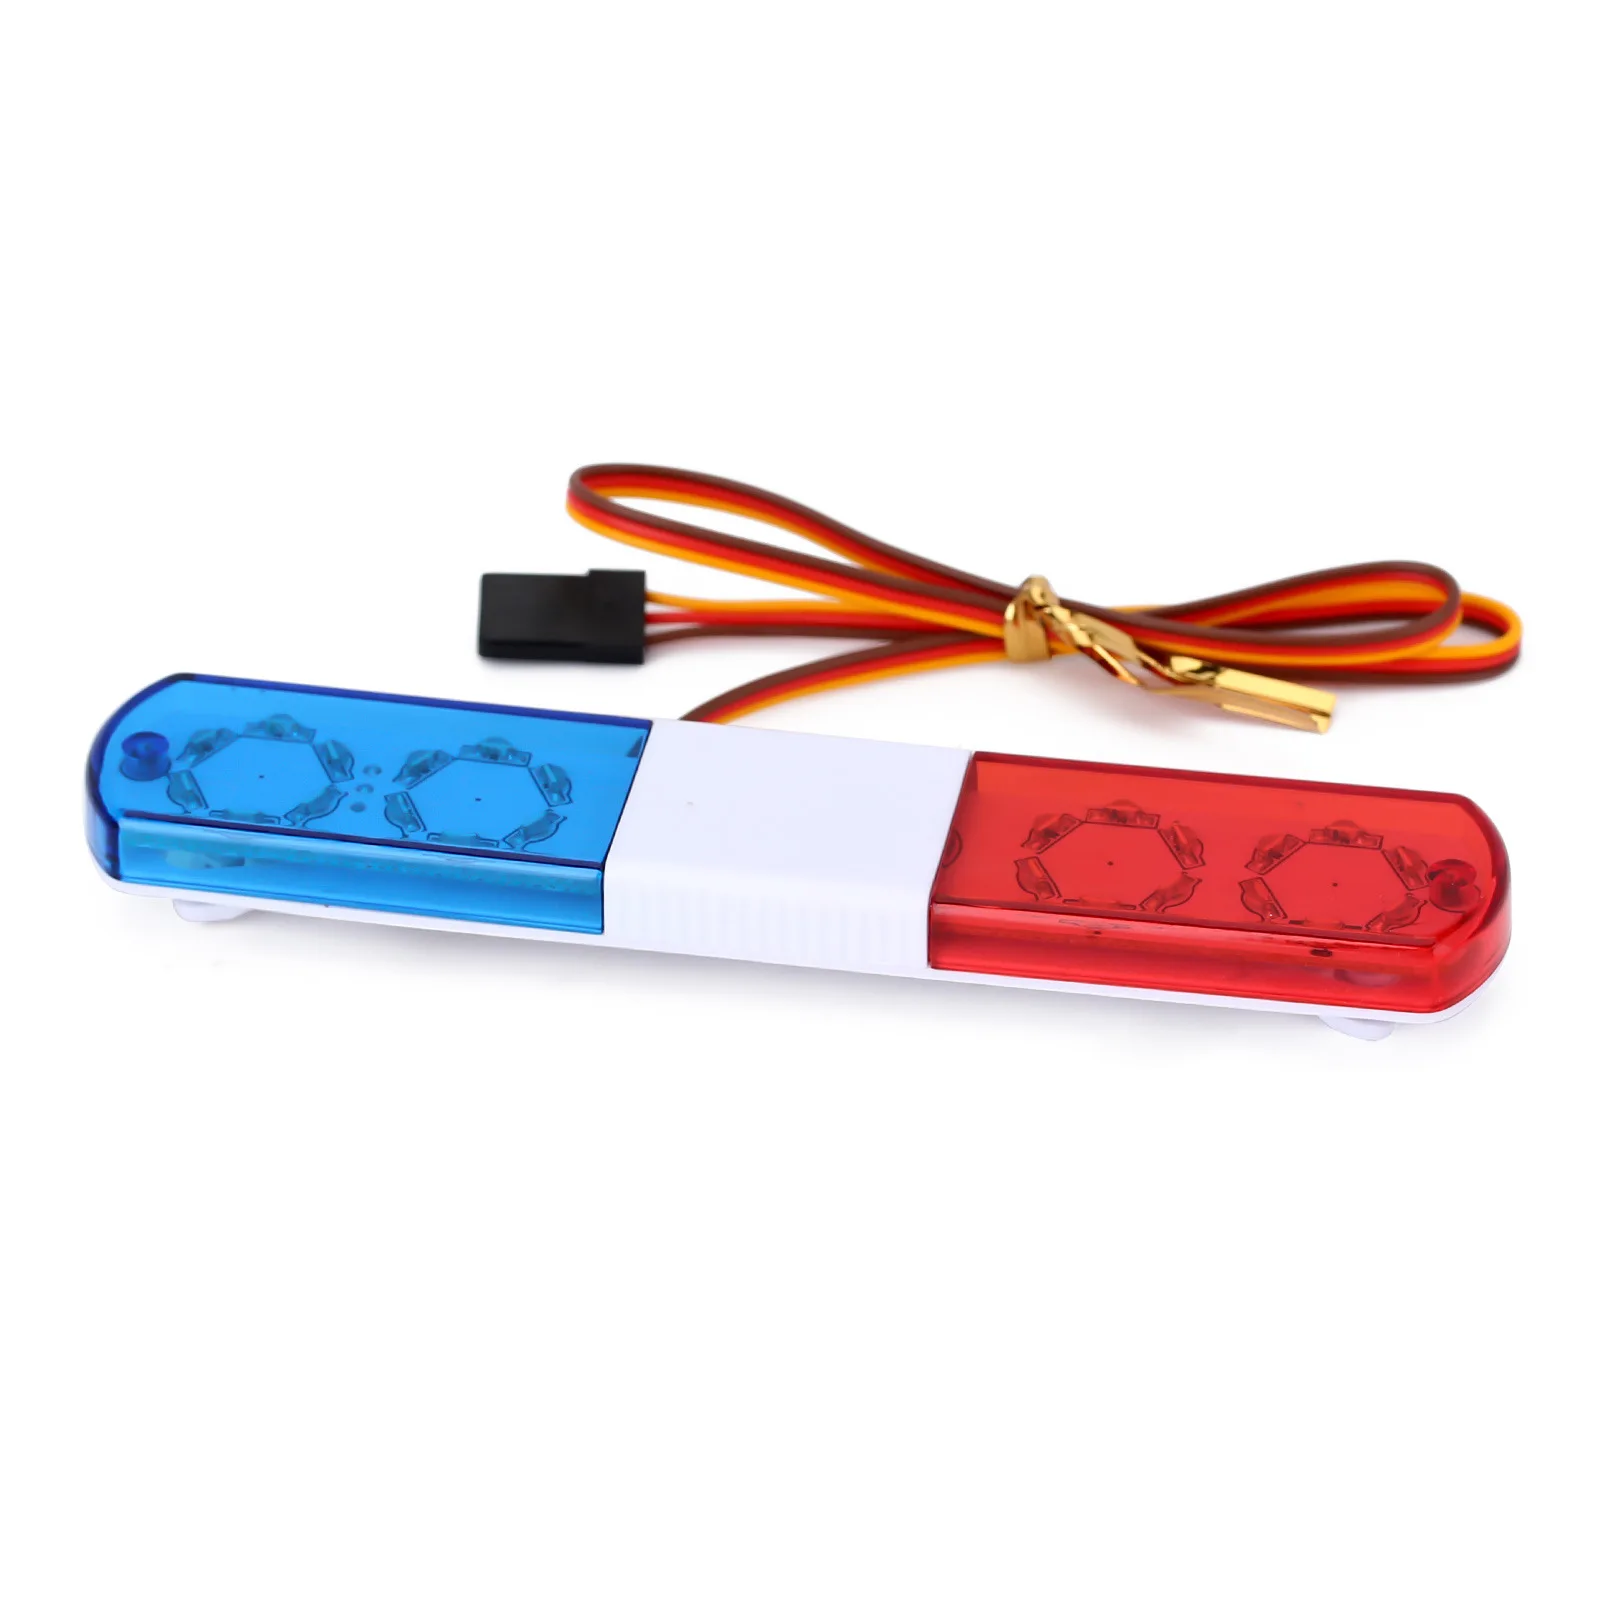 Upgrade accessories for 1 / 10, 1 / 12, 1 / 16 RC vehicles: shell simulation alarm lamp, engineering lamp